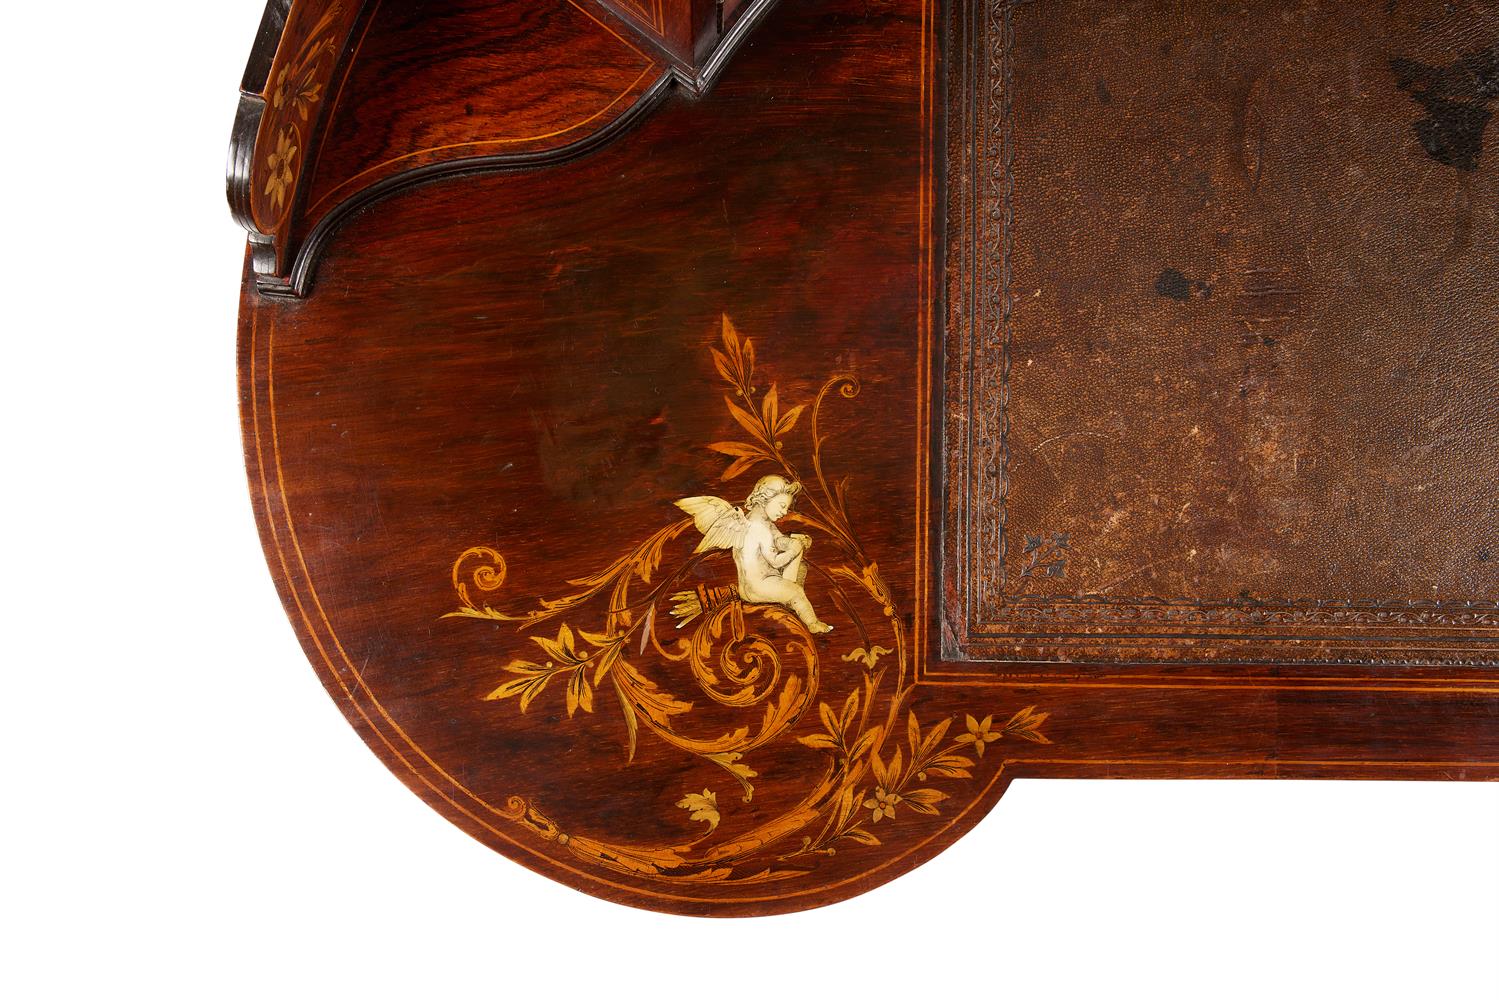 Y A LATE VICTORIAN ROSEWOOD AND IVORY MARQUETRY KIDNEY SHAPED DESK - Image 8 of 8